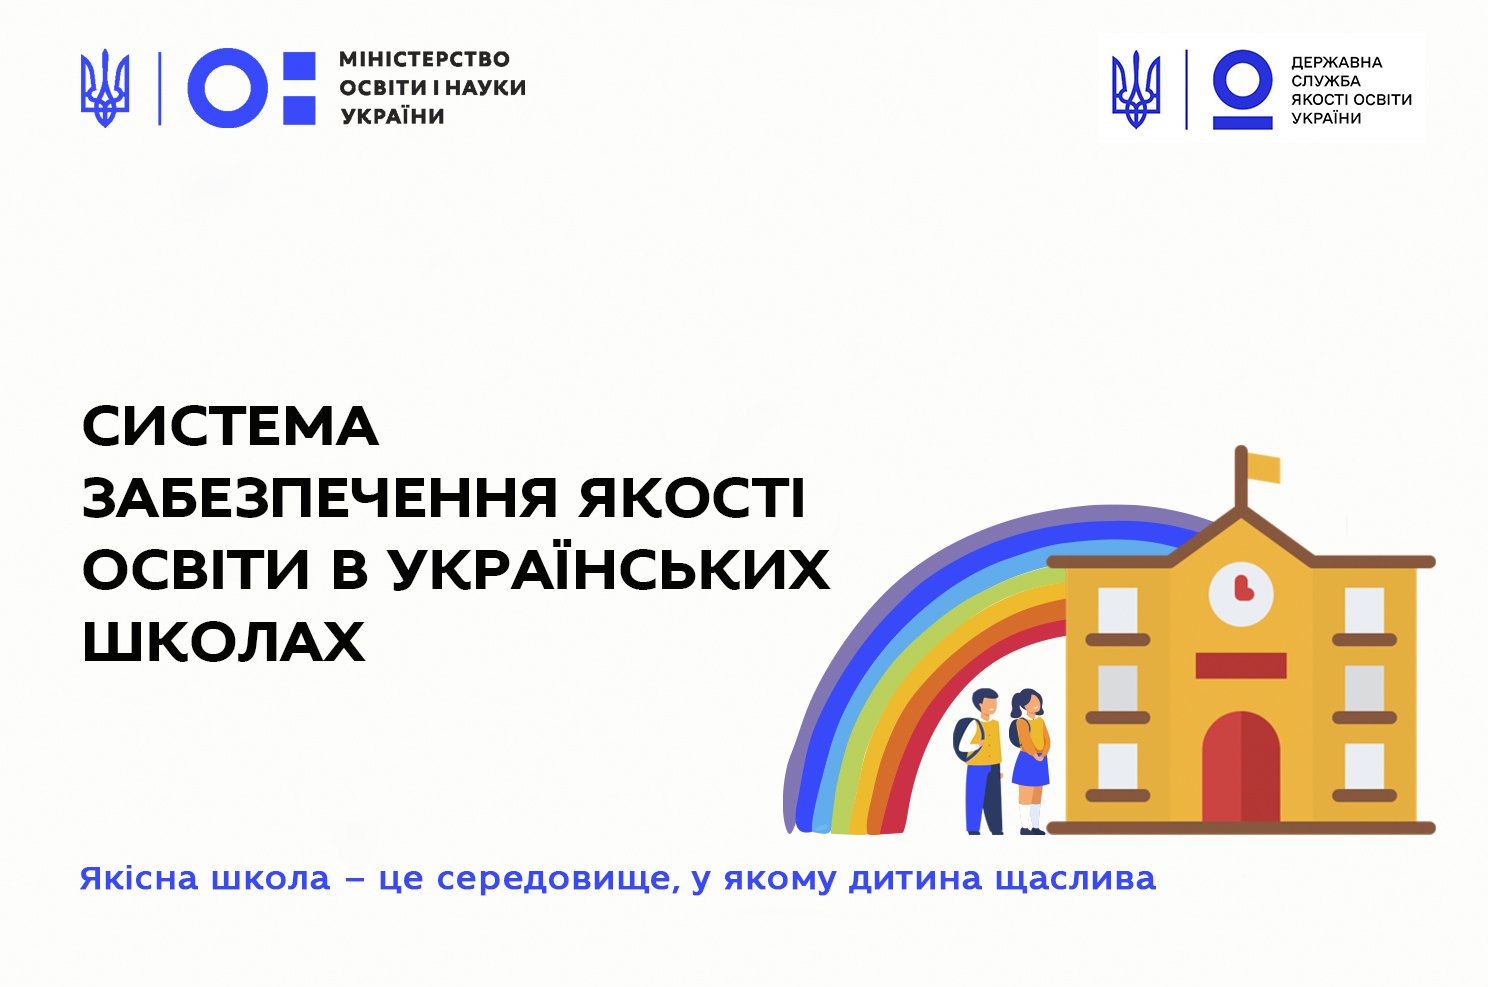 An Information Campaign on the Education Quality Assurance System in Ukrainian Schools